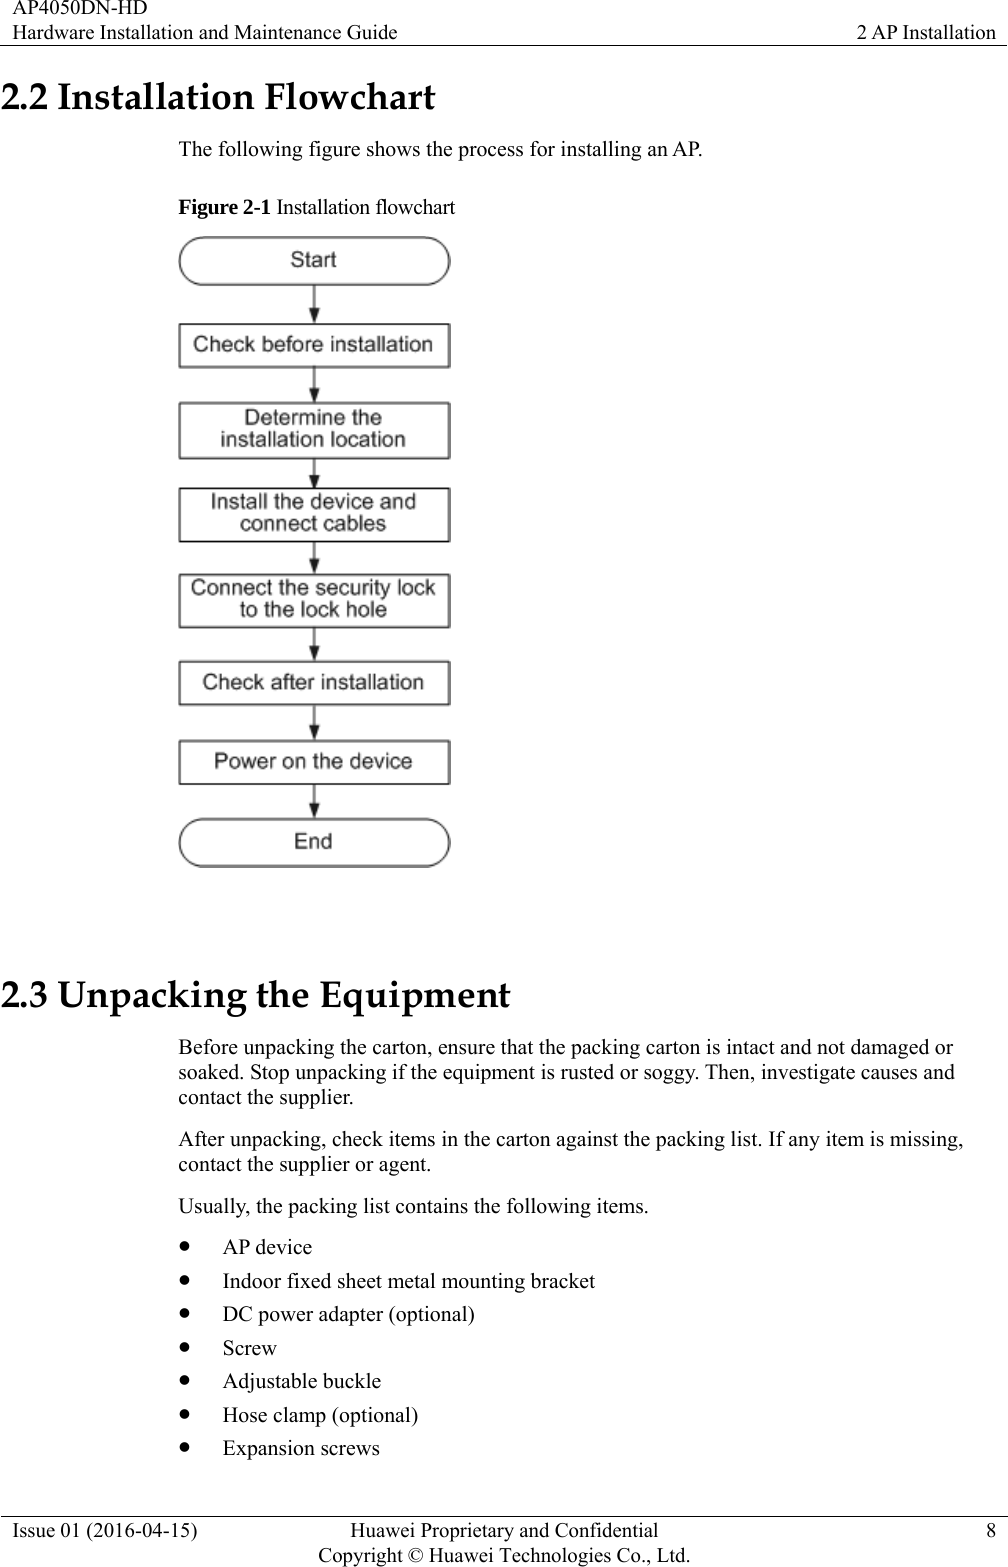 AP4050DN-HD Hardware Installation and Maintenance Guide  2 AP Installation Issue 01 (2016-04-15)  Huawei Proprietary and Confidential         Copyright © Huawei Technologies Co., Ltd.8 2.2 Installation Flowchart The following figure shows the process for installing an AP.   Figure 2-1 Installation flowchart   2.3 Unpacking the Equipment Before unpacking the carton, ensure that the packing carton is intact and not damaged or soaked. Stop unpacking if the equipment is rusted or soggy. Then, investigate causes and contact the supplier. After unpacking, check items in the carton against the packing list. If any item is missing, contact the supplier or agent. Usually, the packing list contains the following items.  AP device  Indoor fixed sheet metal mounting bracket  DC power adapter (optional)  Screw  Adjustable buckle  Hose clamp (optional)  Expansion screws 